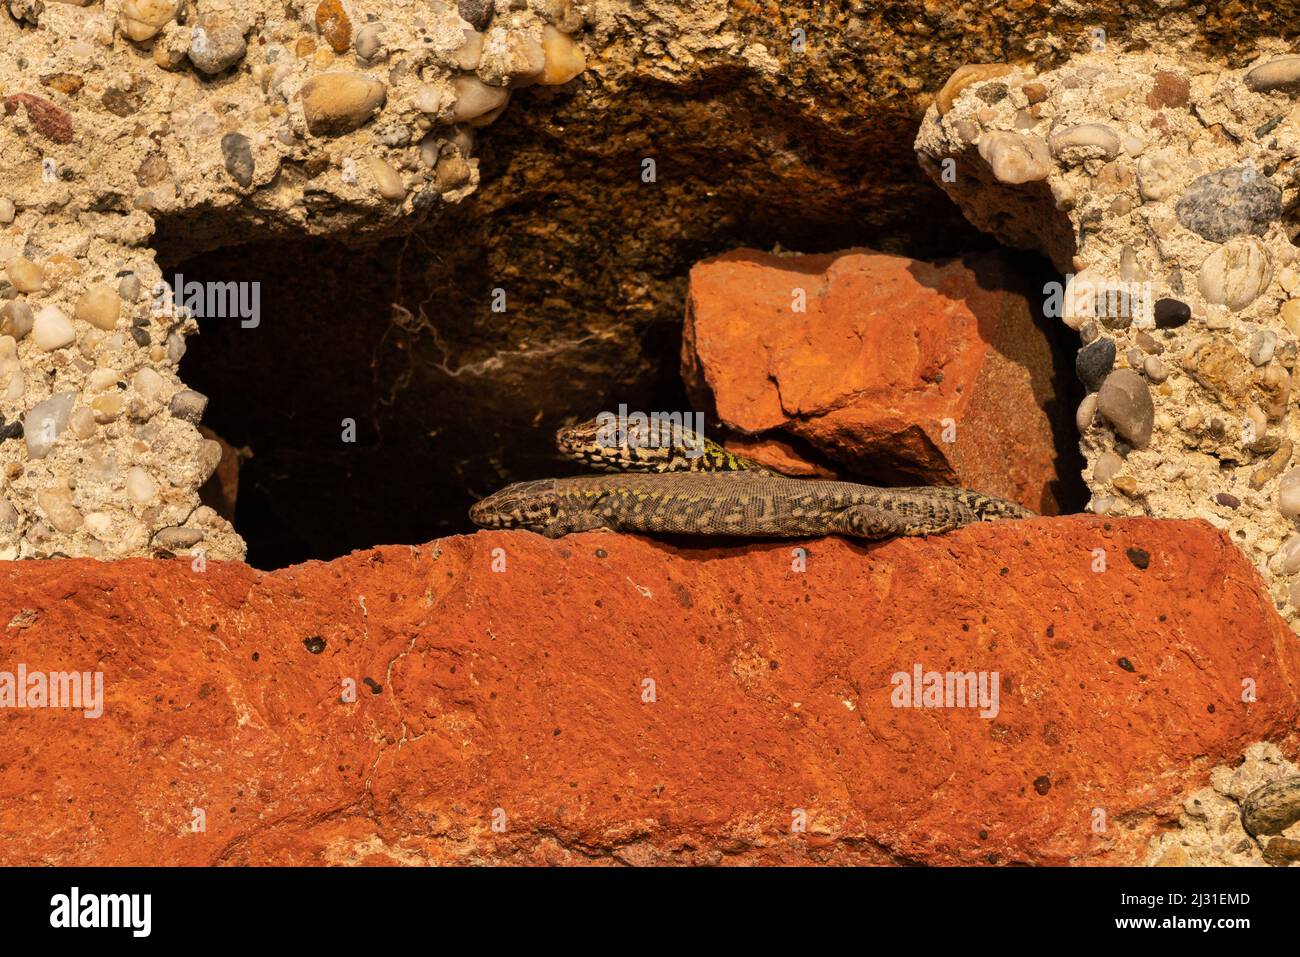 Two wall lizards in the warm evening light. Stock Photo